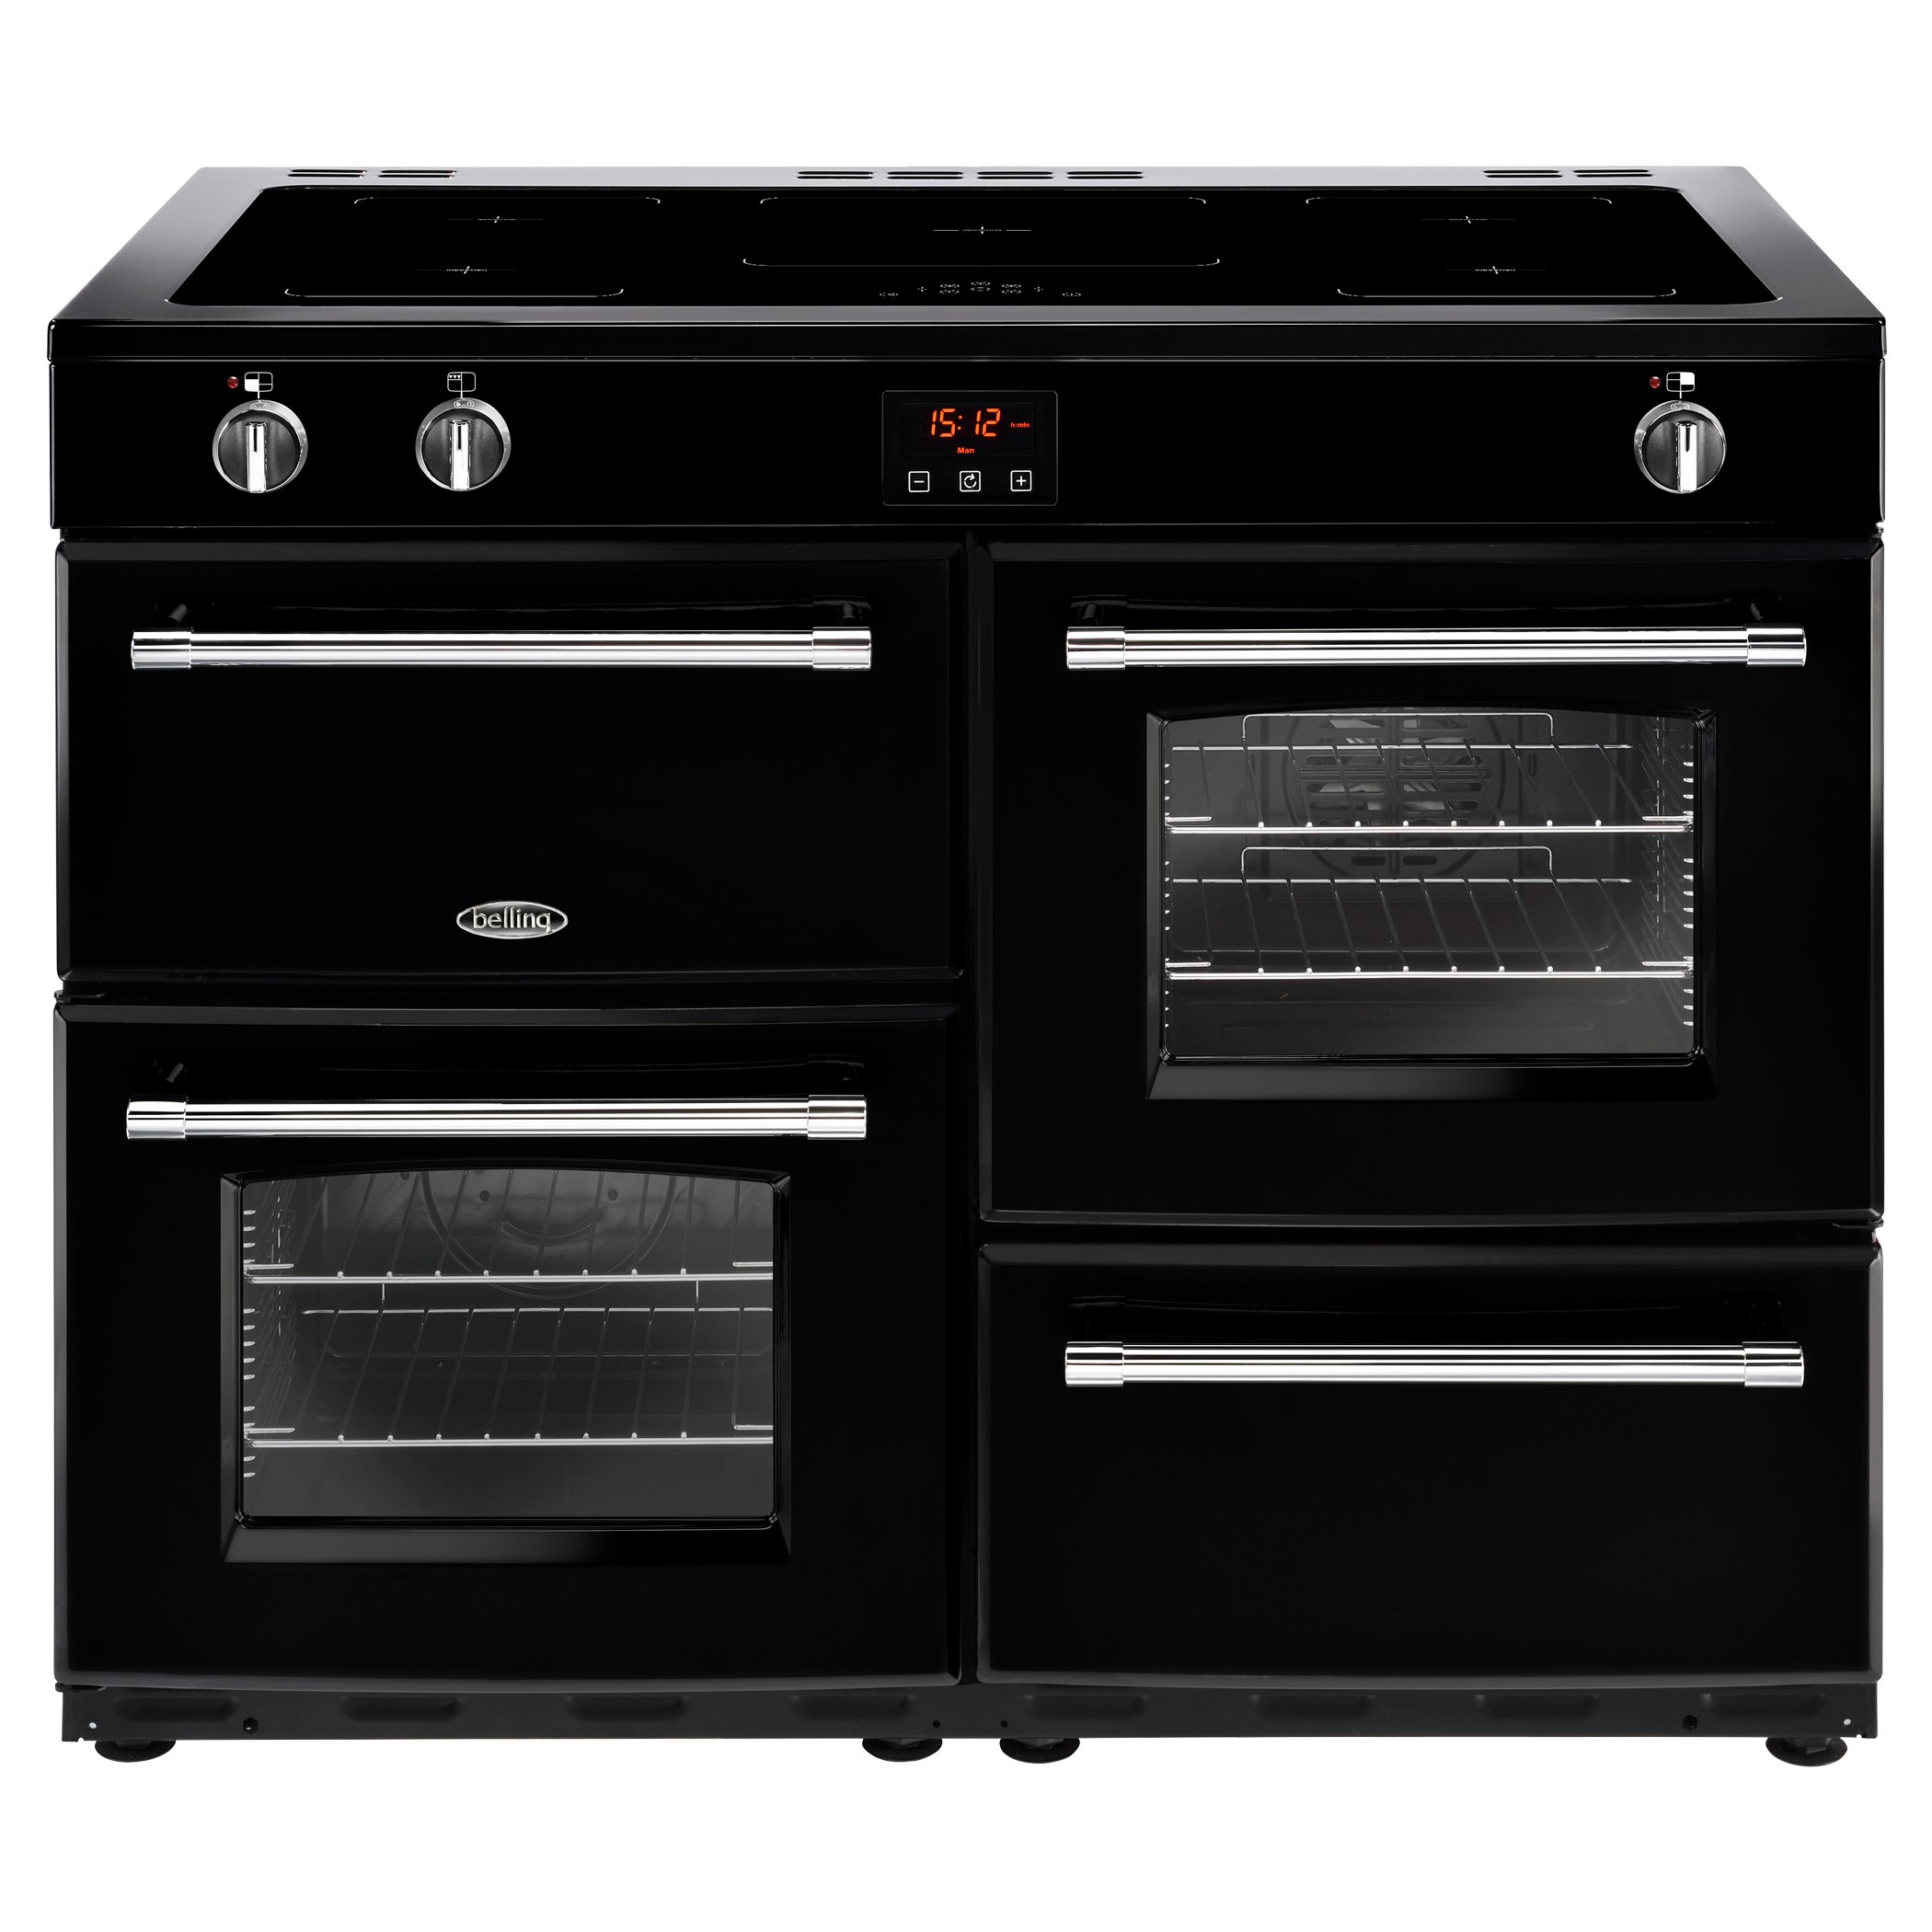 110cm electric range cooker with induction hotplate and smart Link+ technology, Maxi-Clock and easy clean enamel. Requires 32A connection.